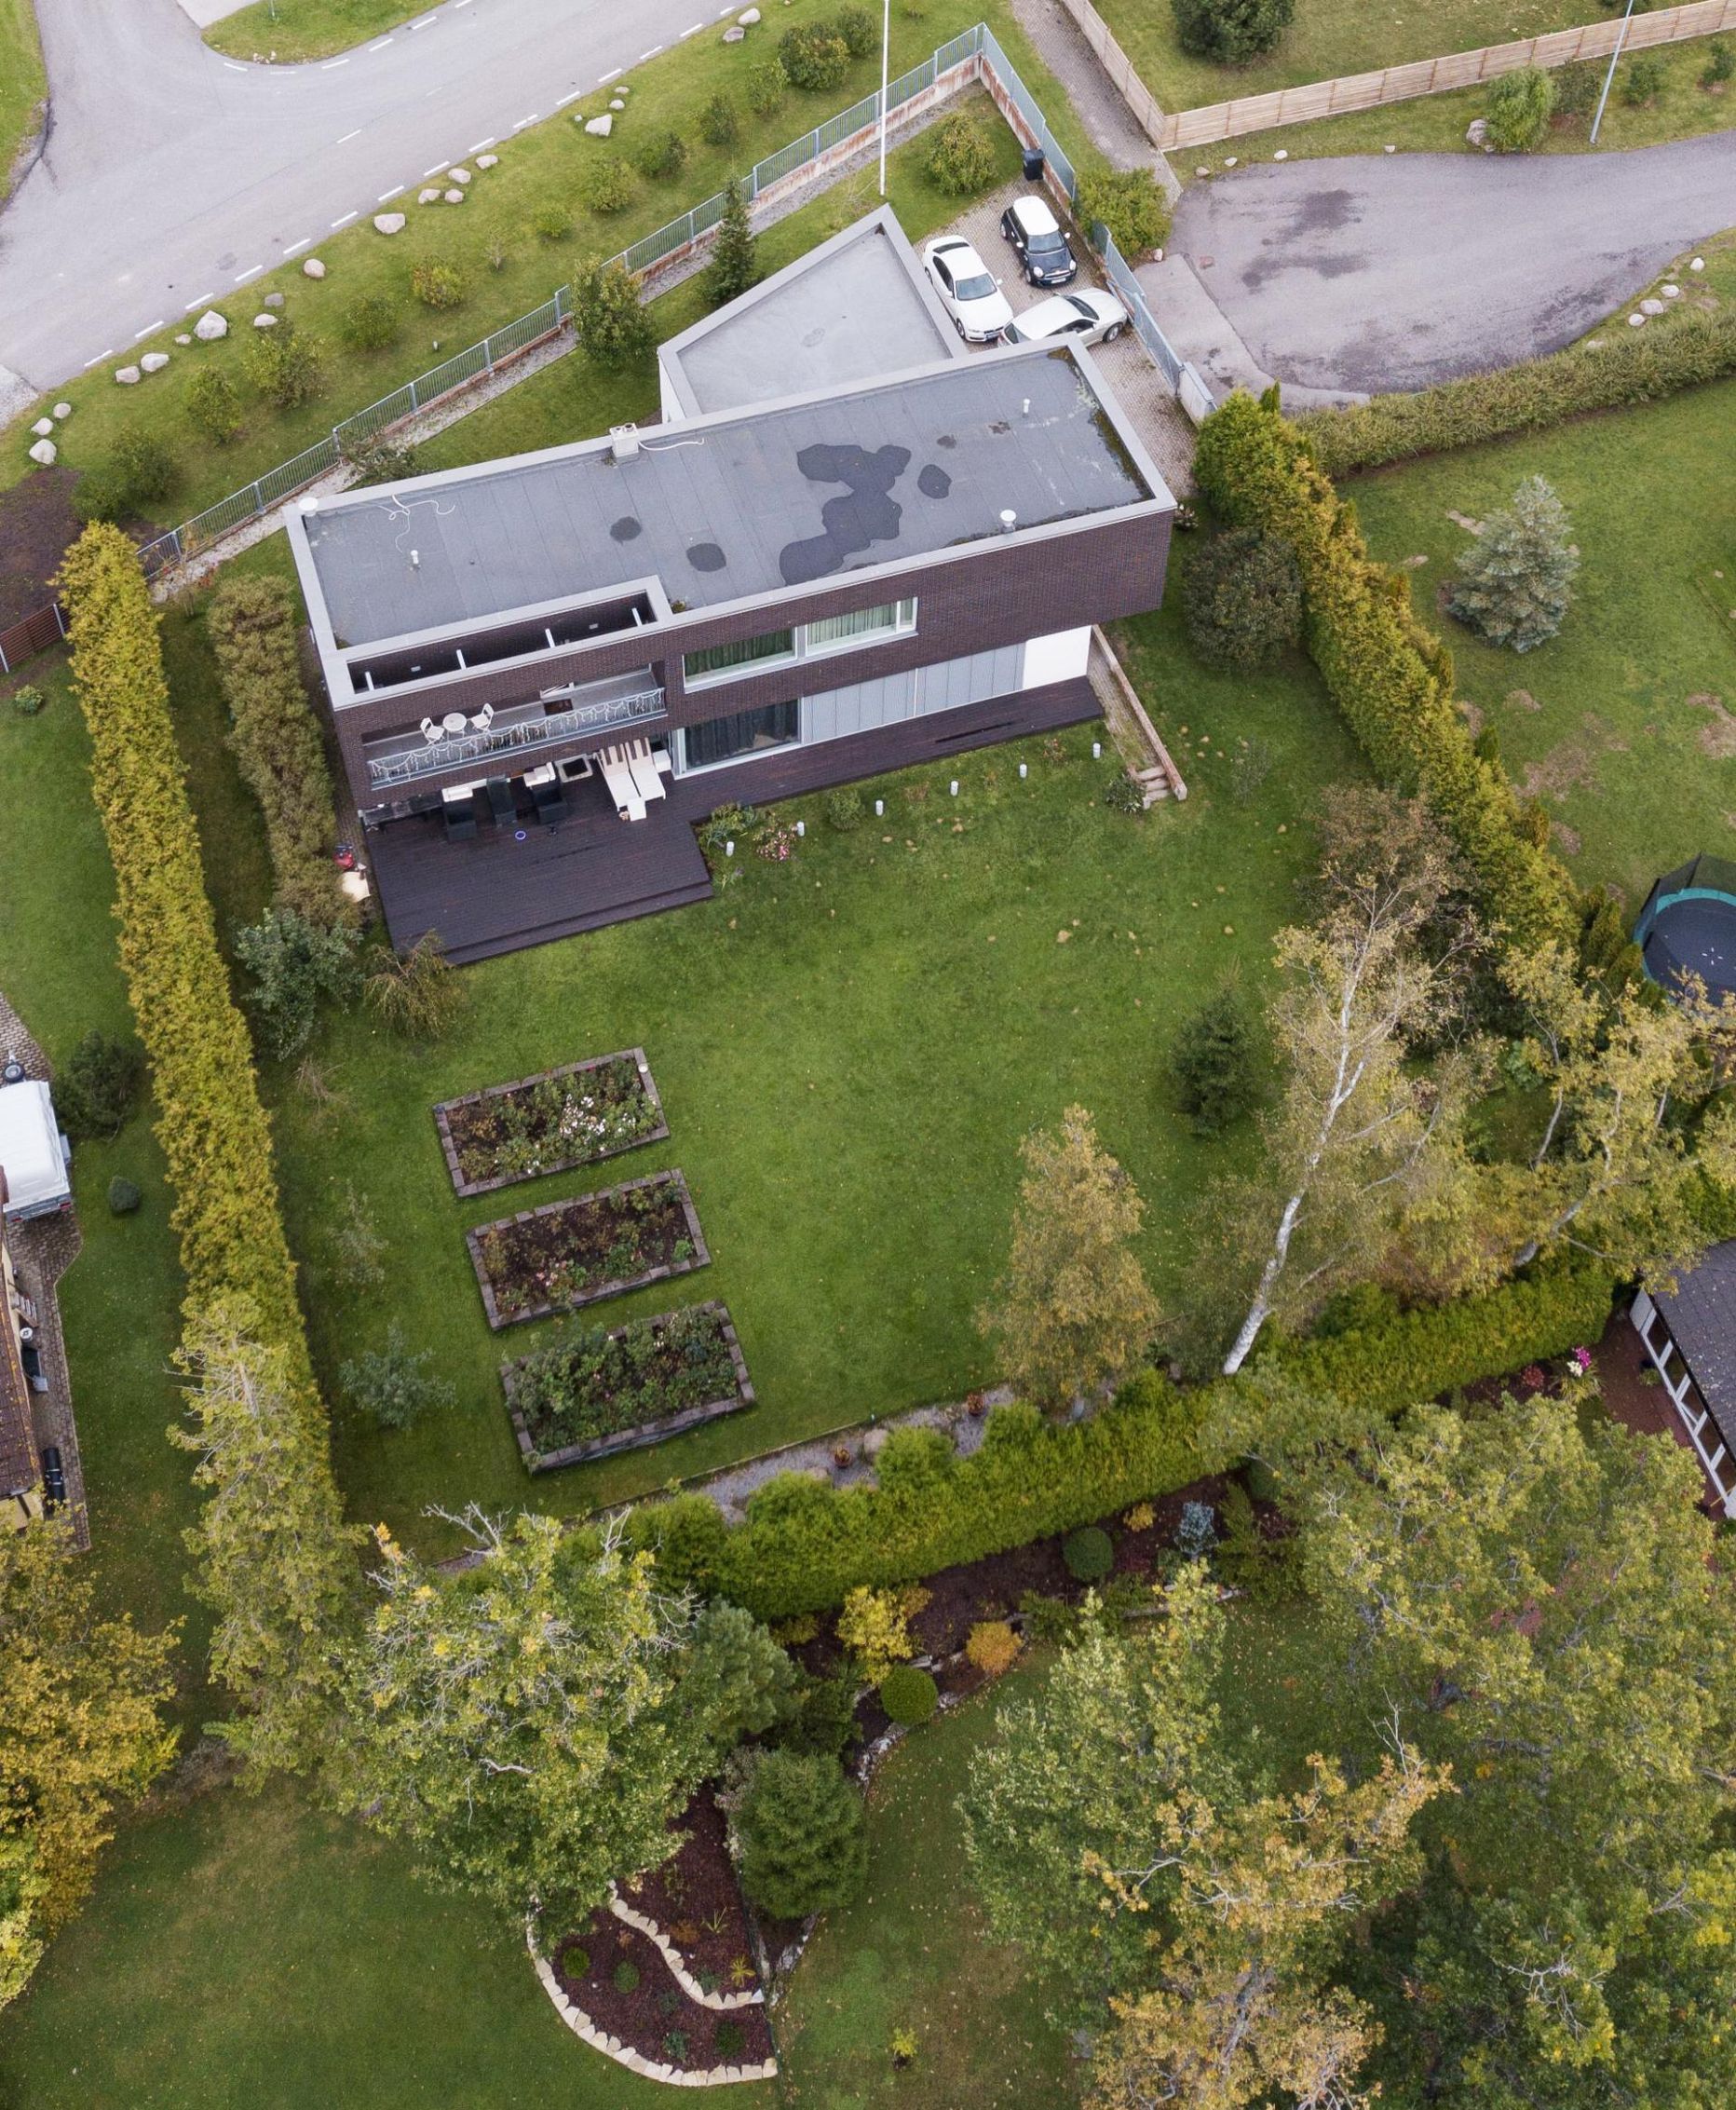 The body of former Danske Estonia CEO Aivar Rehe was found by his family in the back yard of their Pirita residence.